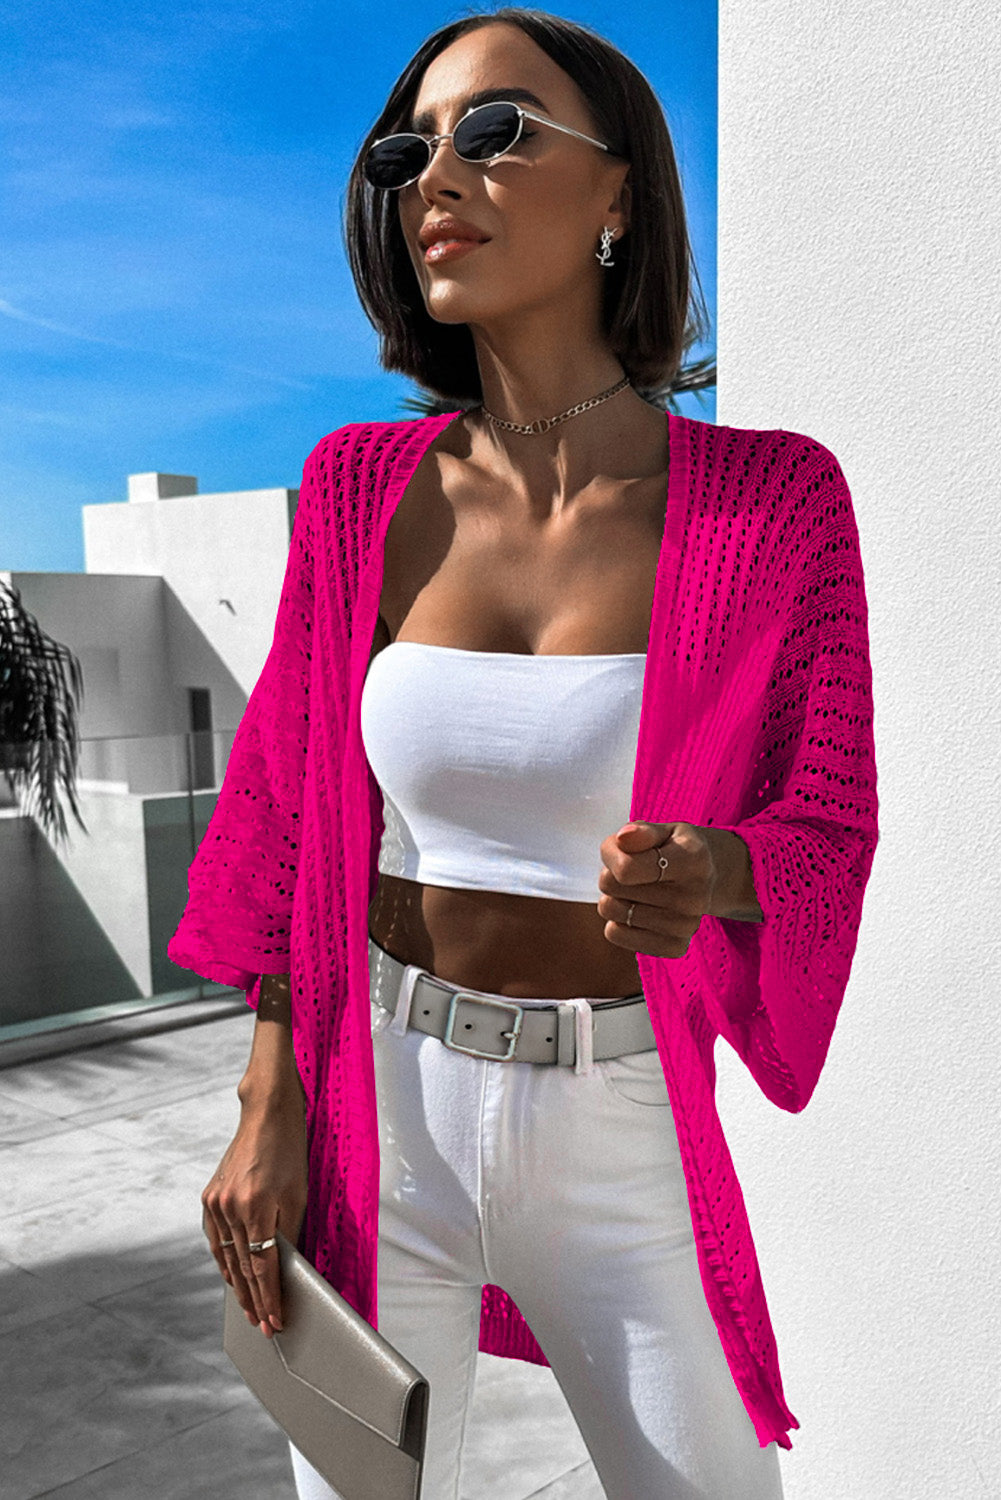 Hollow-out Knit Kimono Lightweight Cardigan in  Rose